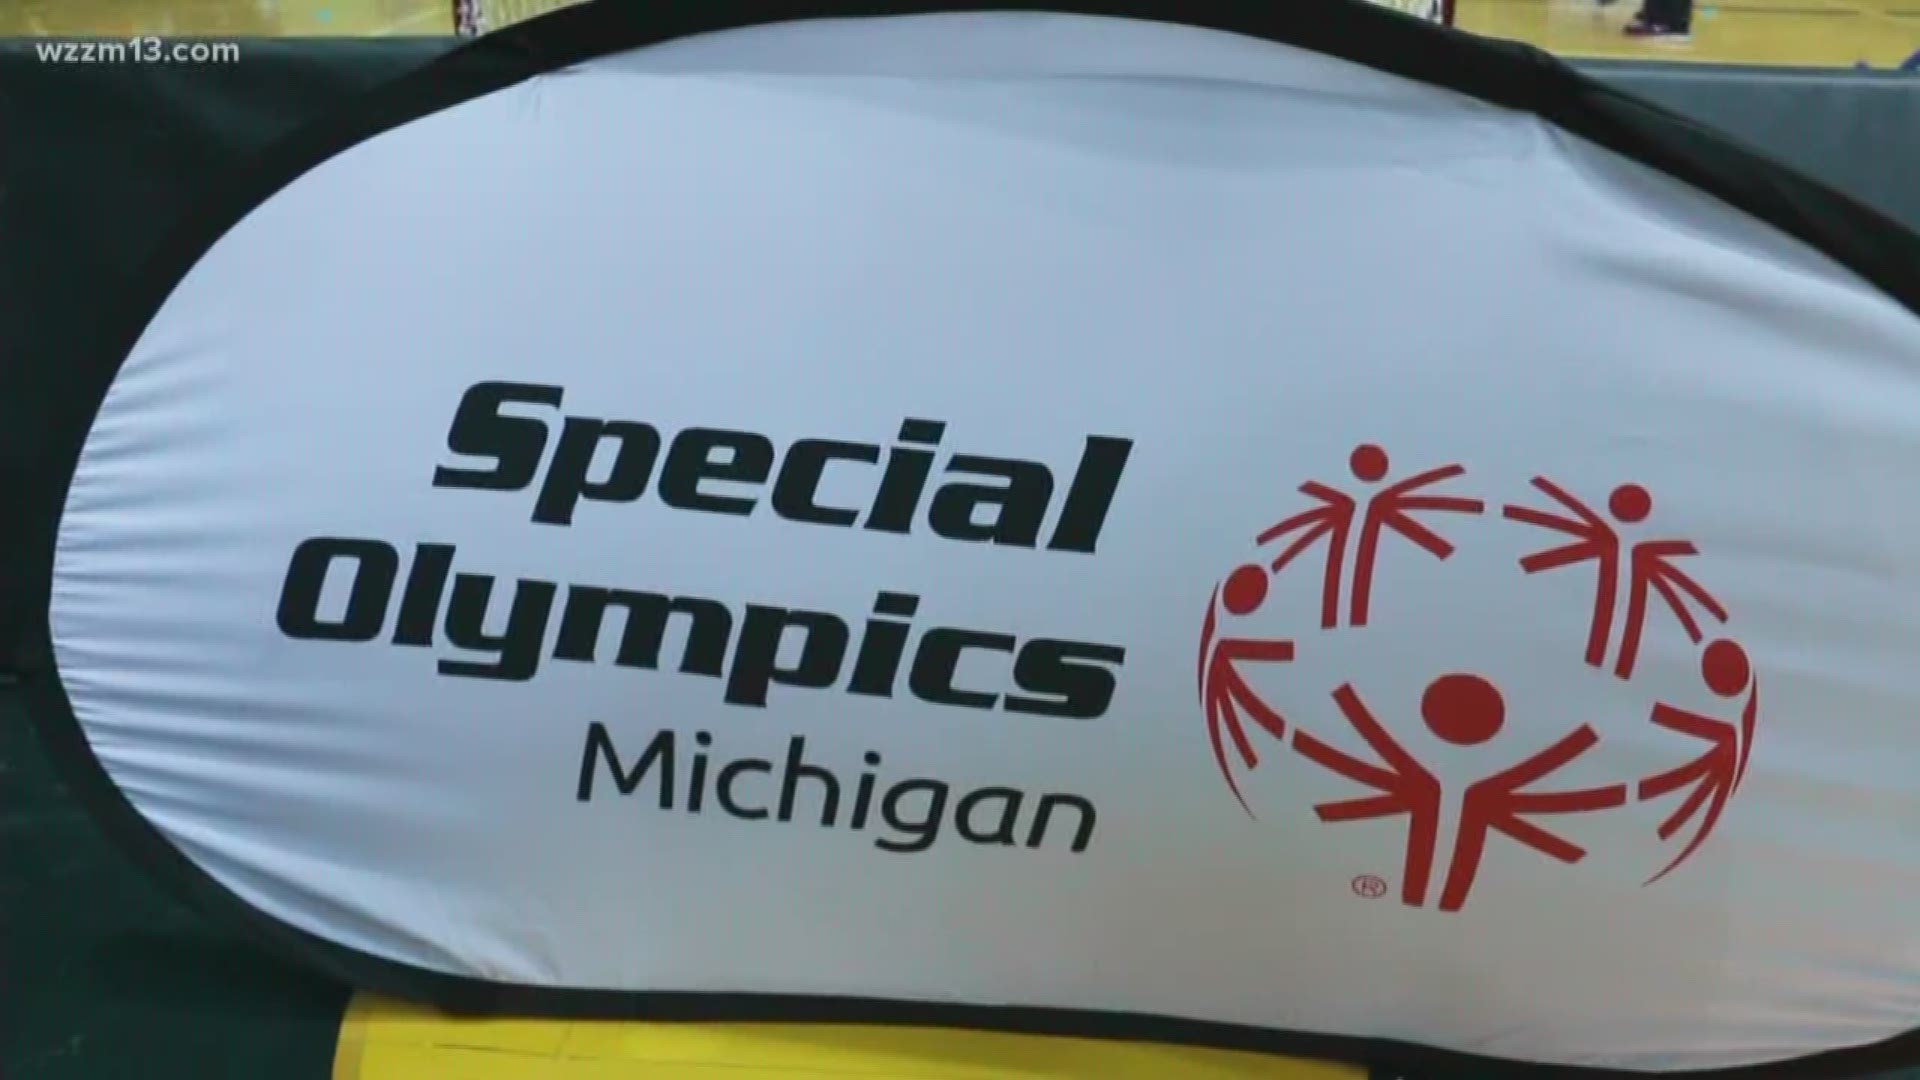 Bottle drive to benefit Special Olympics Michigan